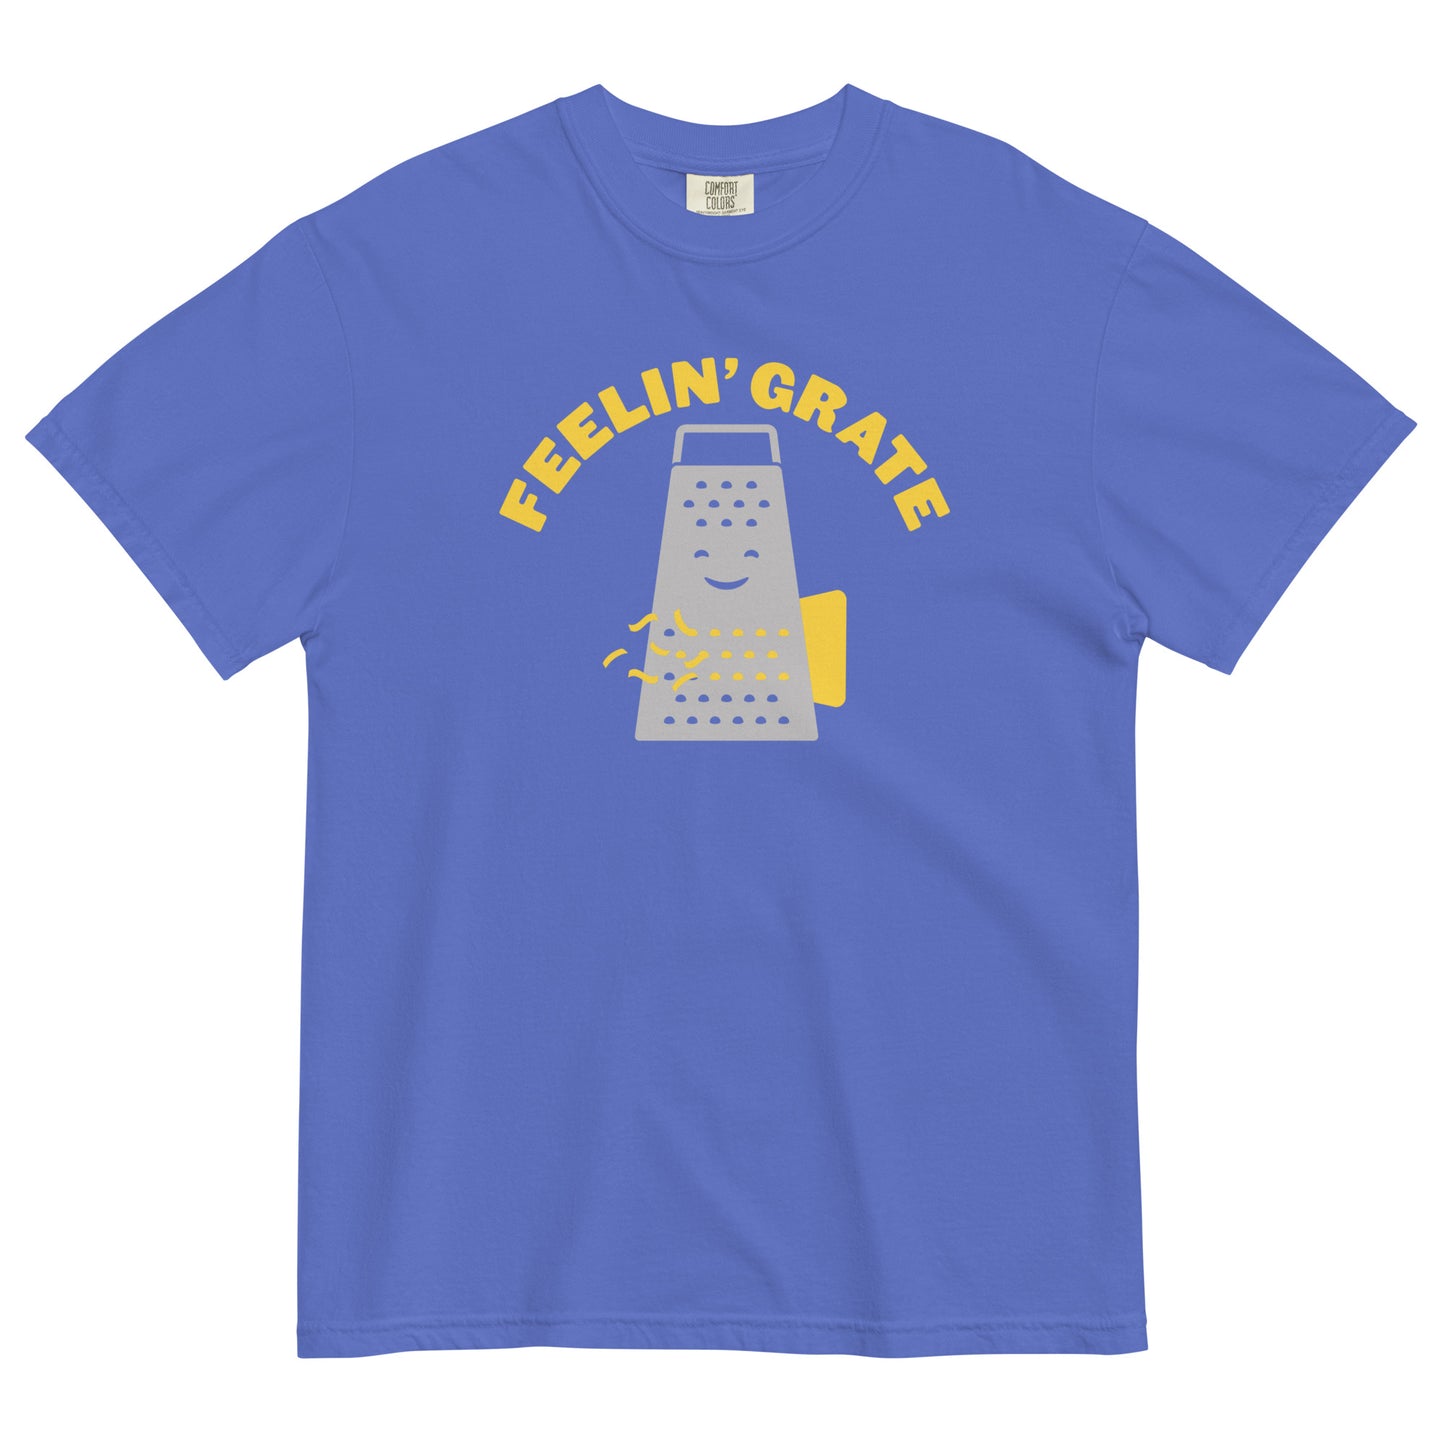 Feelin' Grate Men's Relaxed Fit Tee